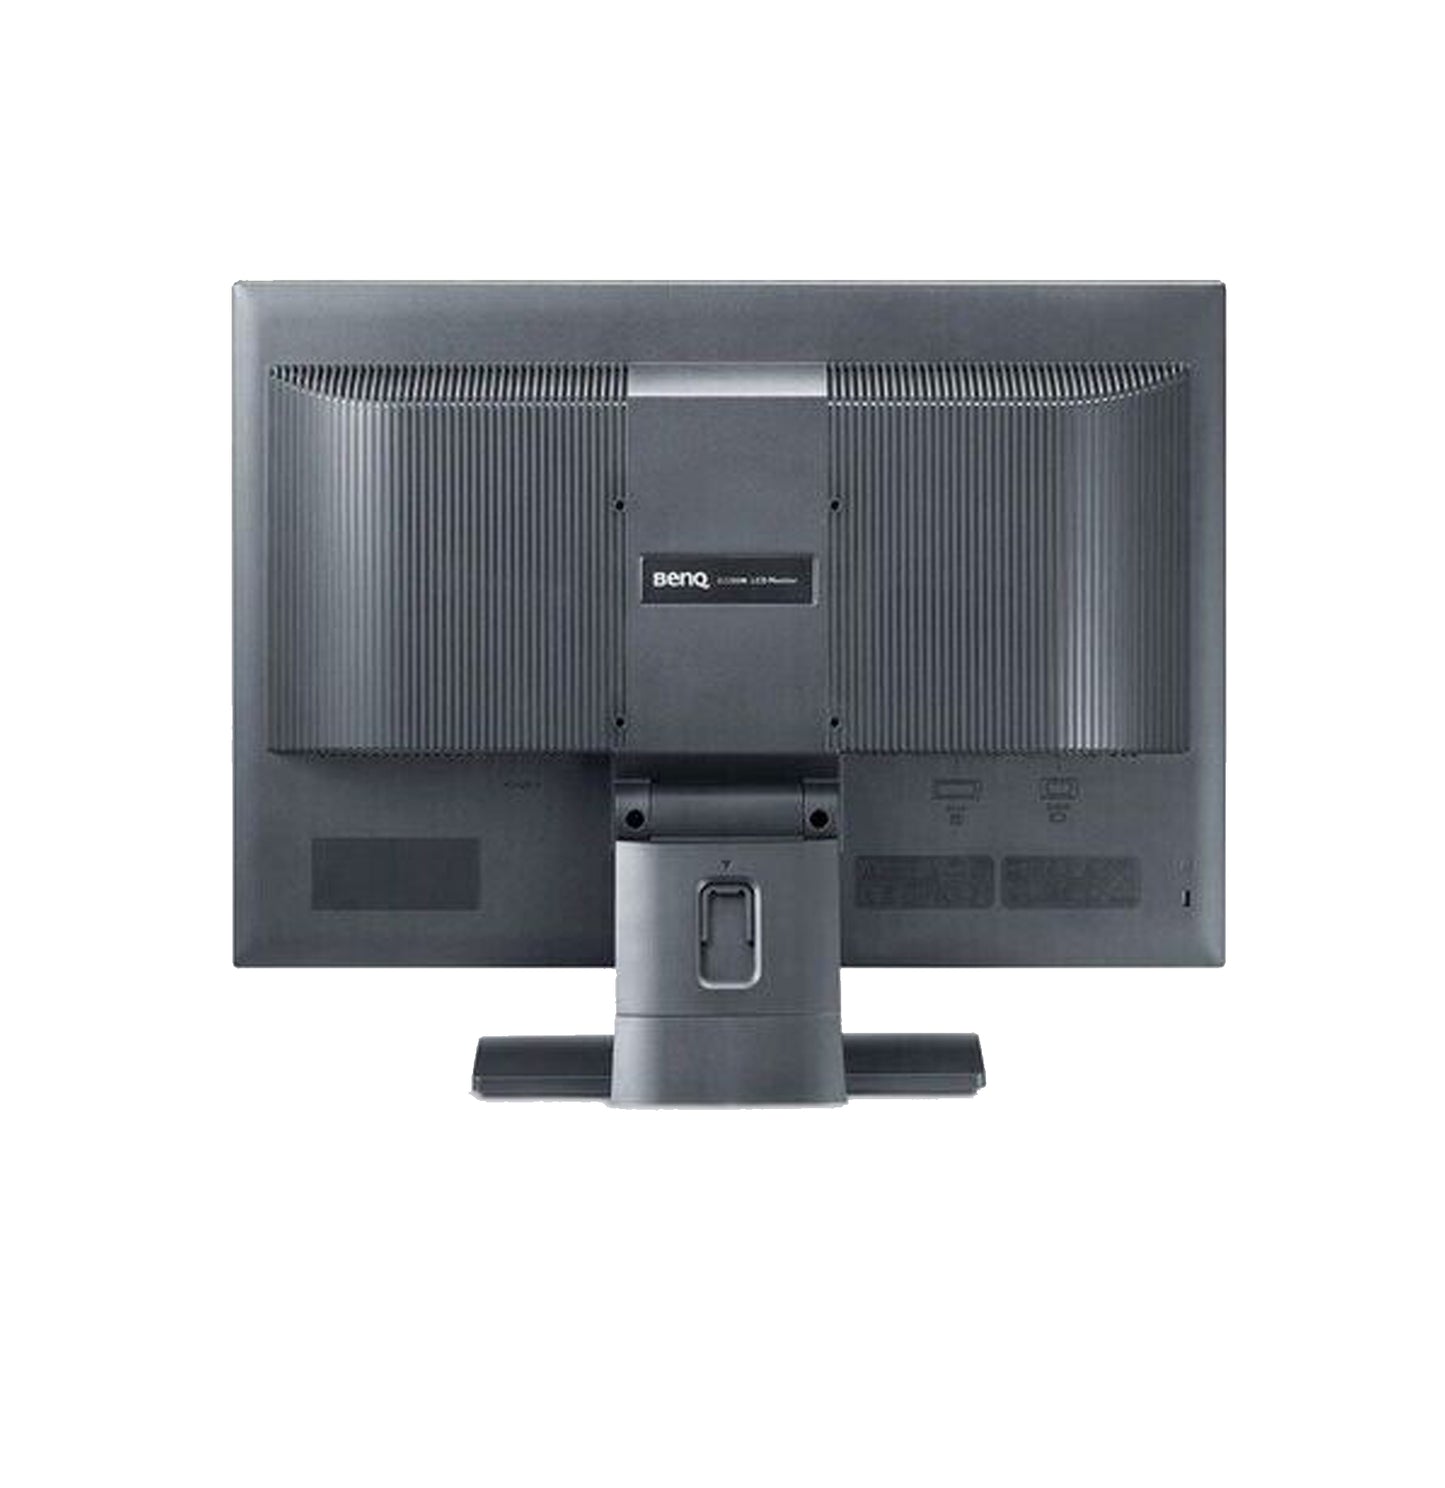 AFFORDABLE BENQ G2200W 22" WIDESCREEN FLAT PANEL RELIABLE MONITOR DISPLAY